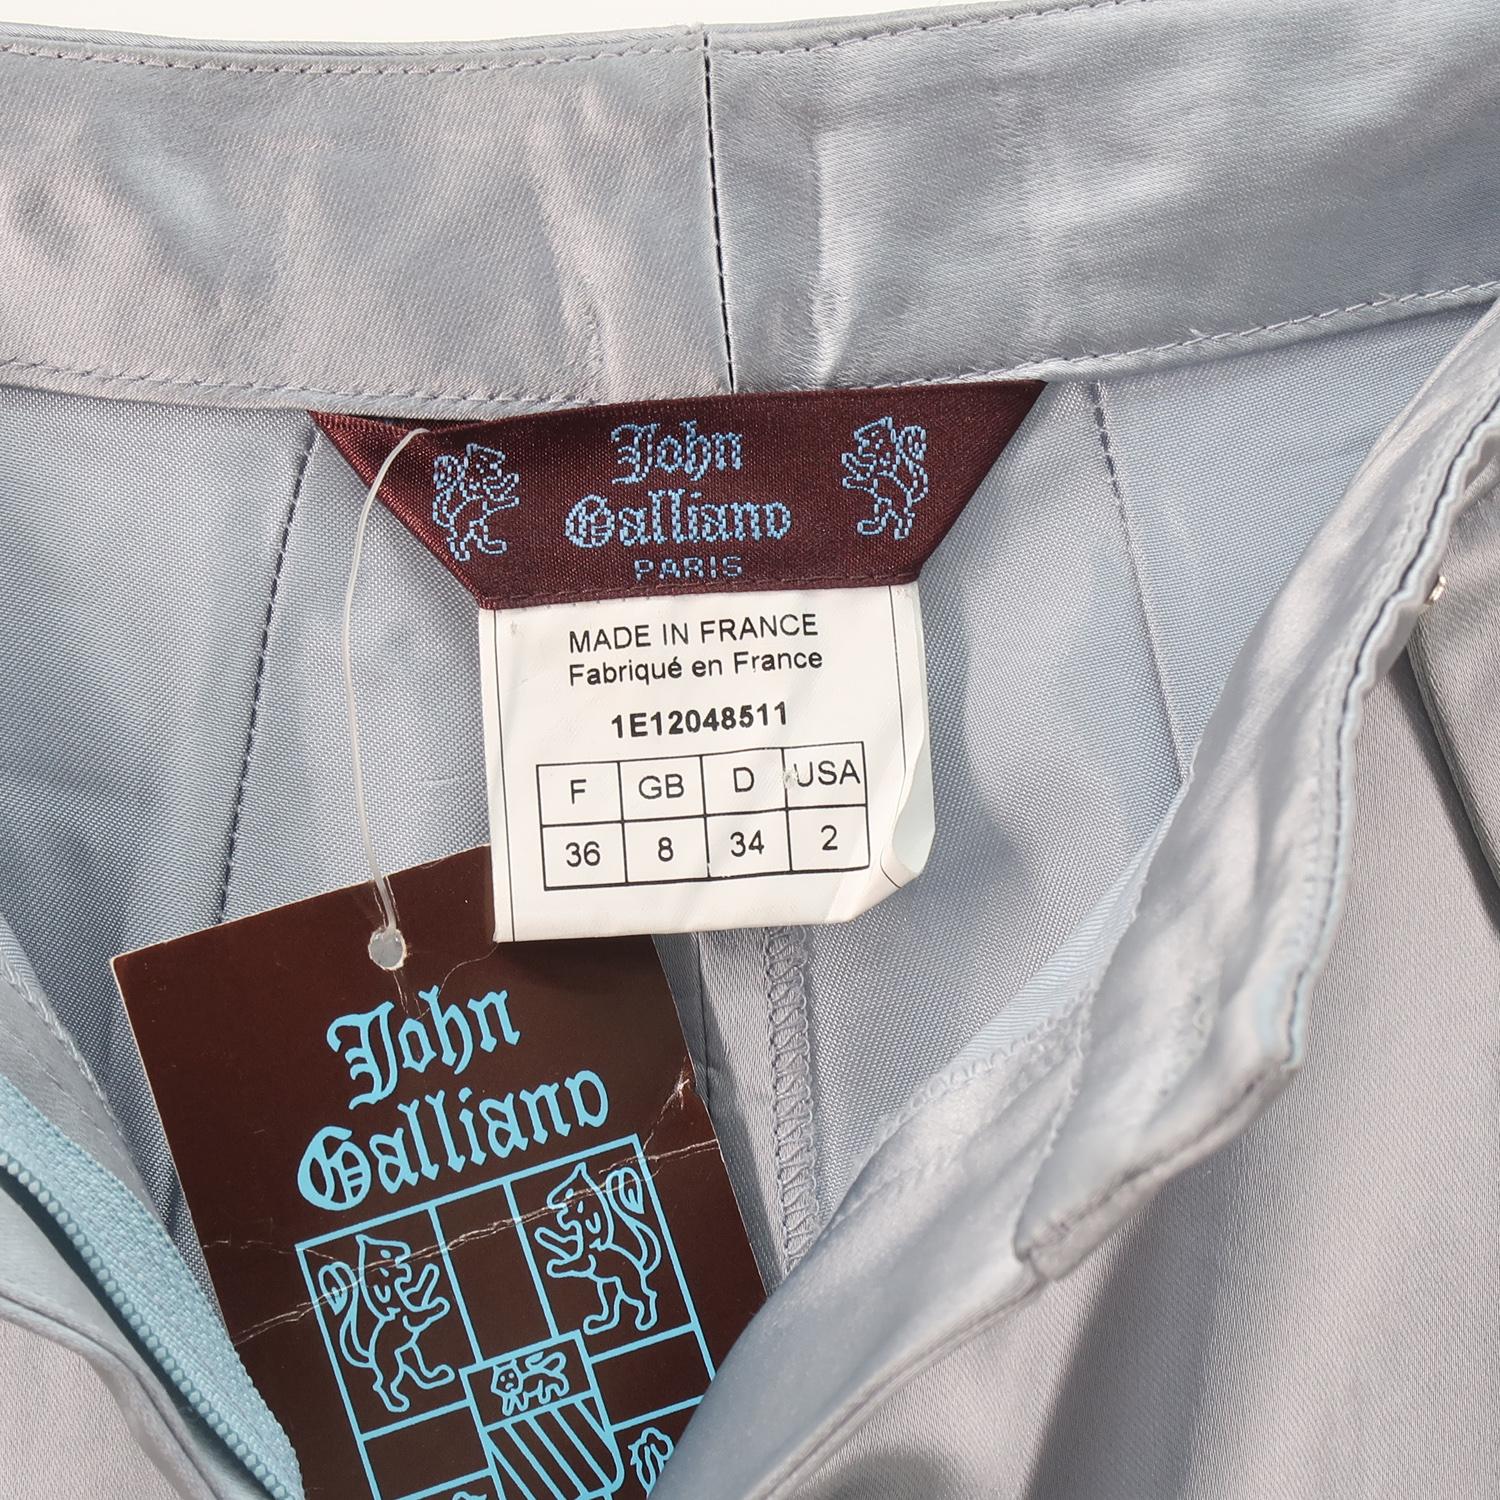 John Galliano SS-1993 Cropped Acetate Pants In Excellent Condition For Sale In Brussels, BE